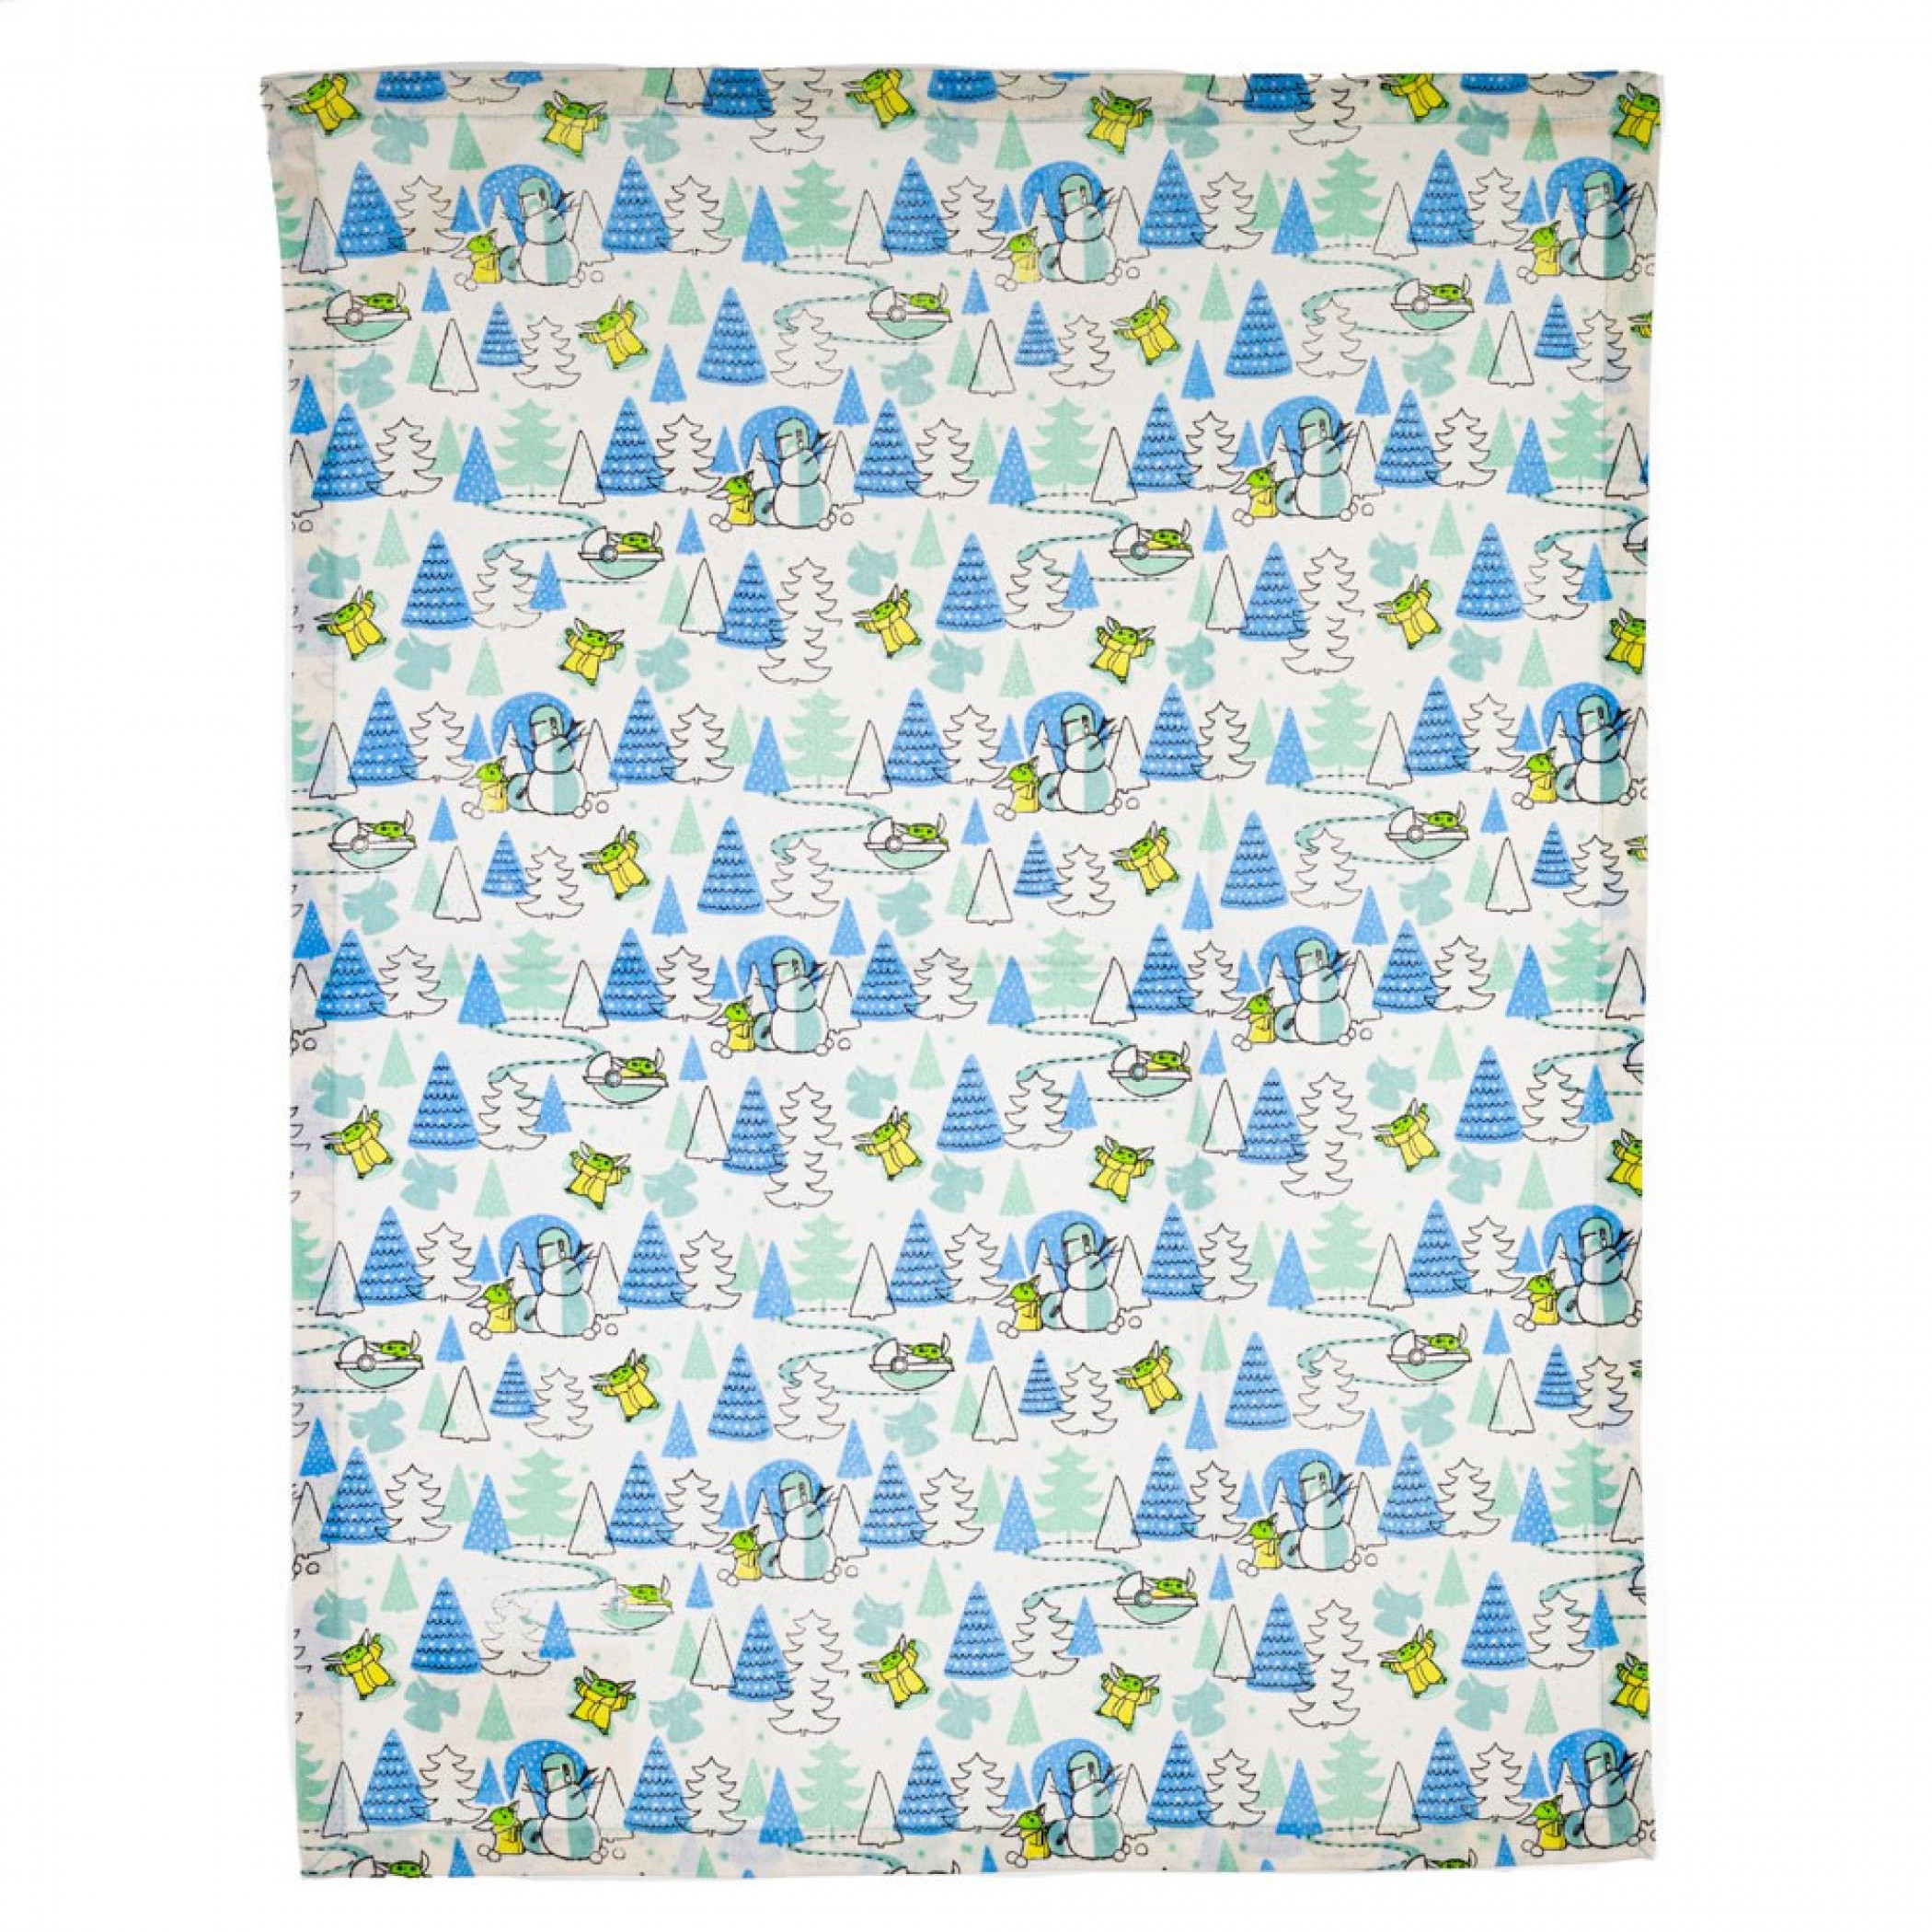 Star Wars Mandalorian The Child Character and Trees All Over Tea Towel